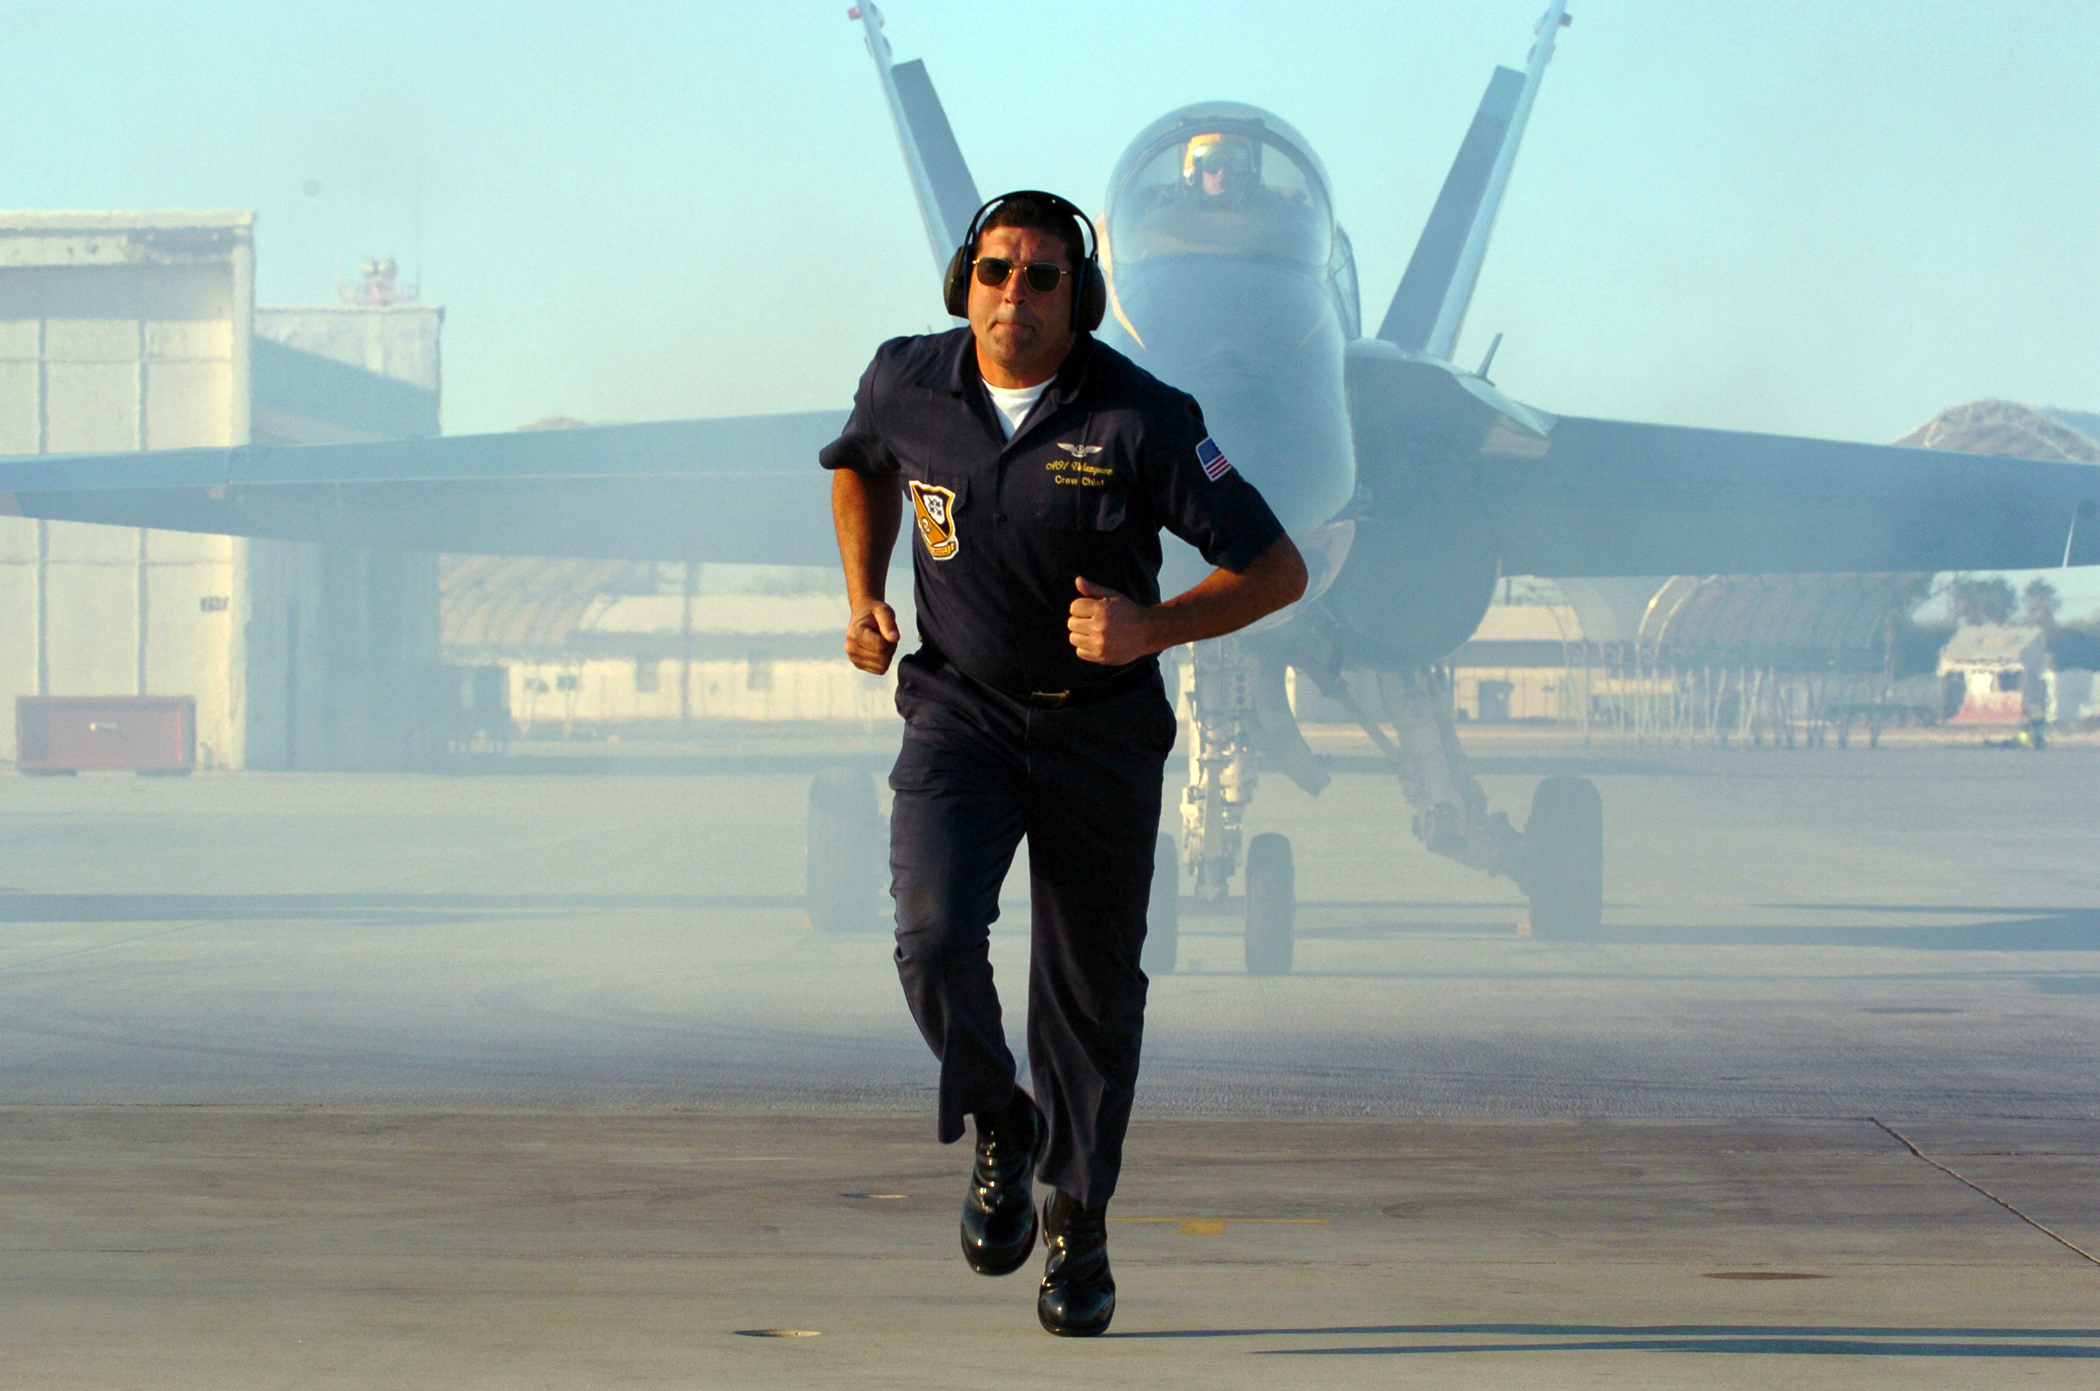 US Navy 050202-N-3874J-002 Crew Chief Aviation Ordnanceman 1st Class Eric Velazquez of Ceiba, Puerto Rico, moves to a safe location, as his Blue Angel F-A-18A Hornet starts to taxi prior to take off